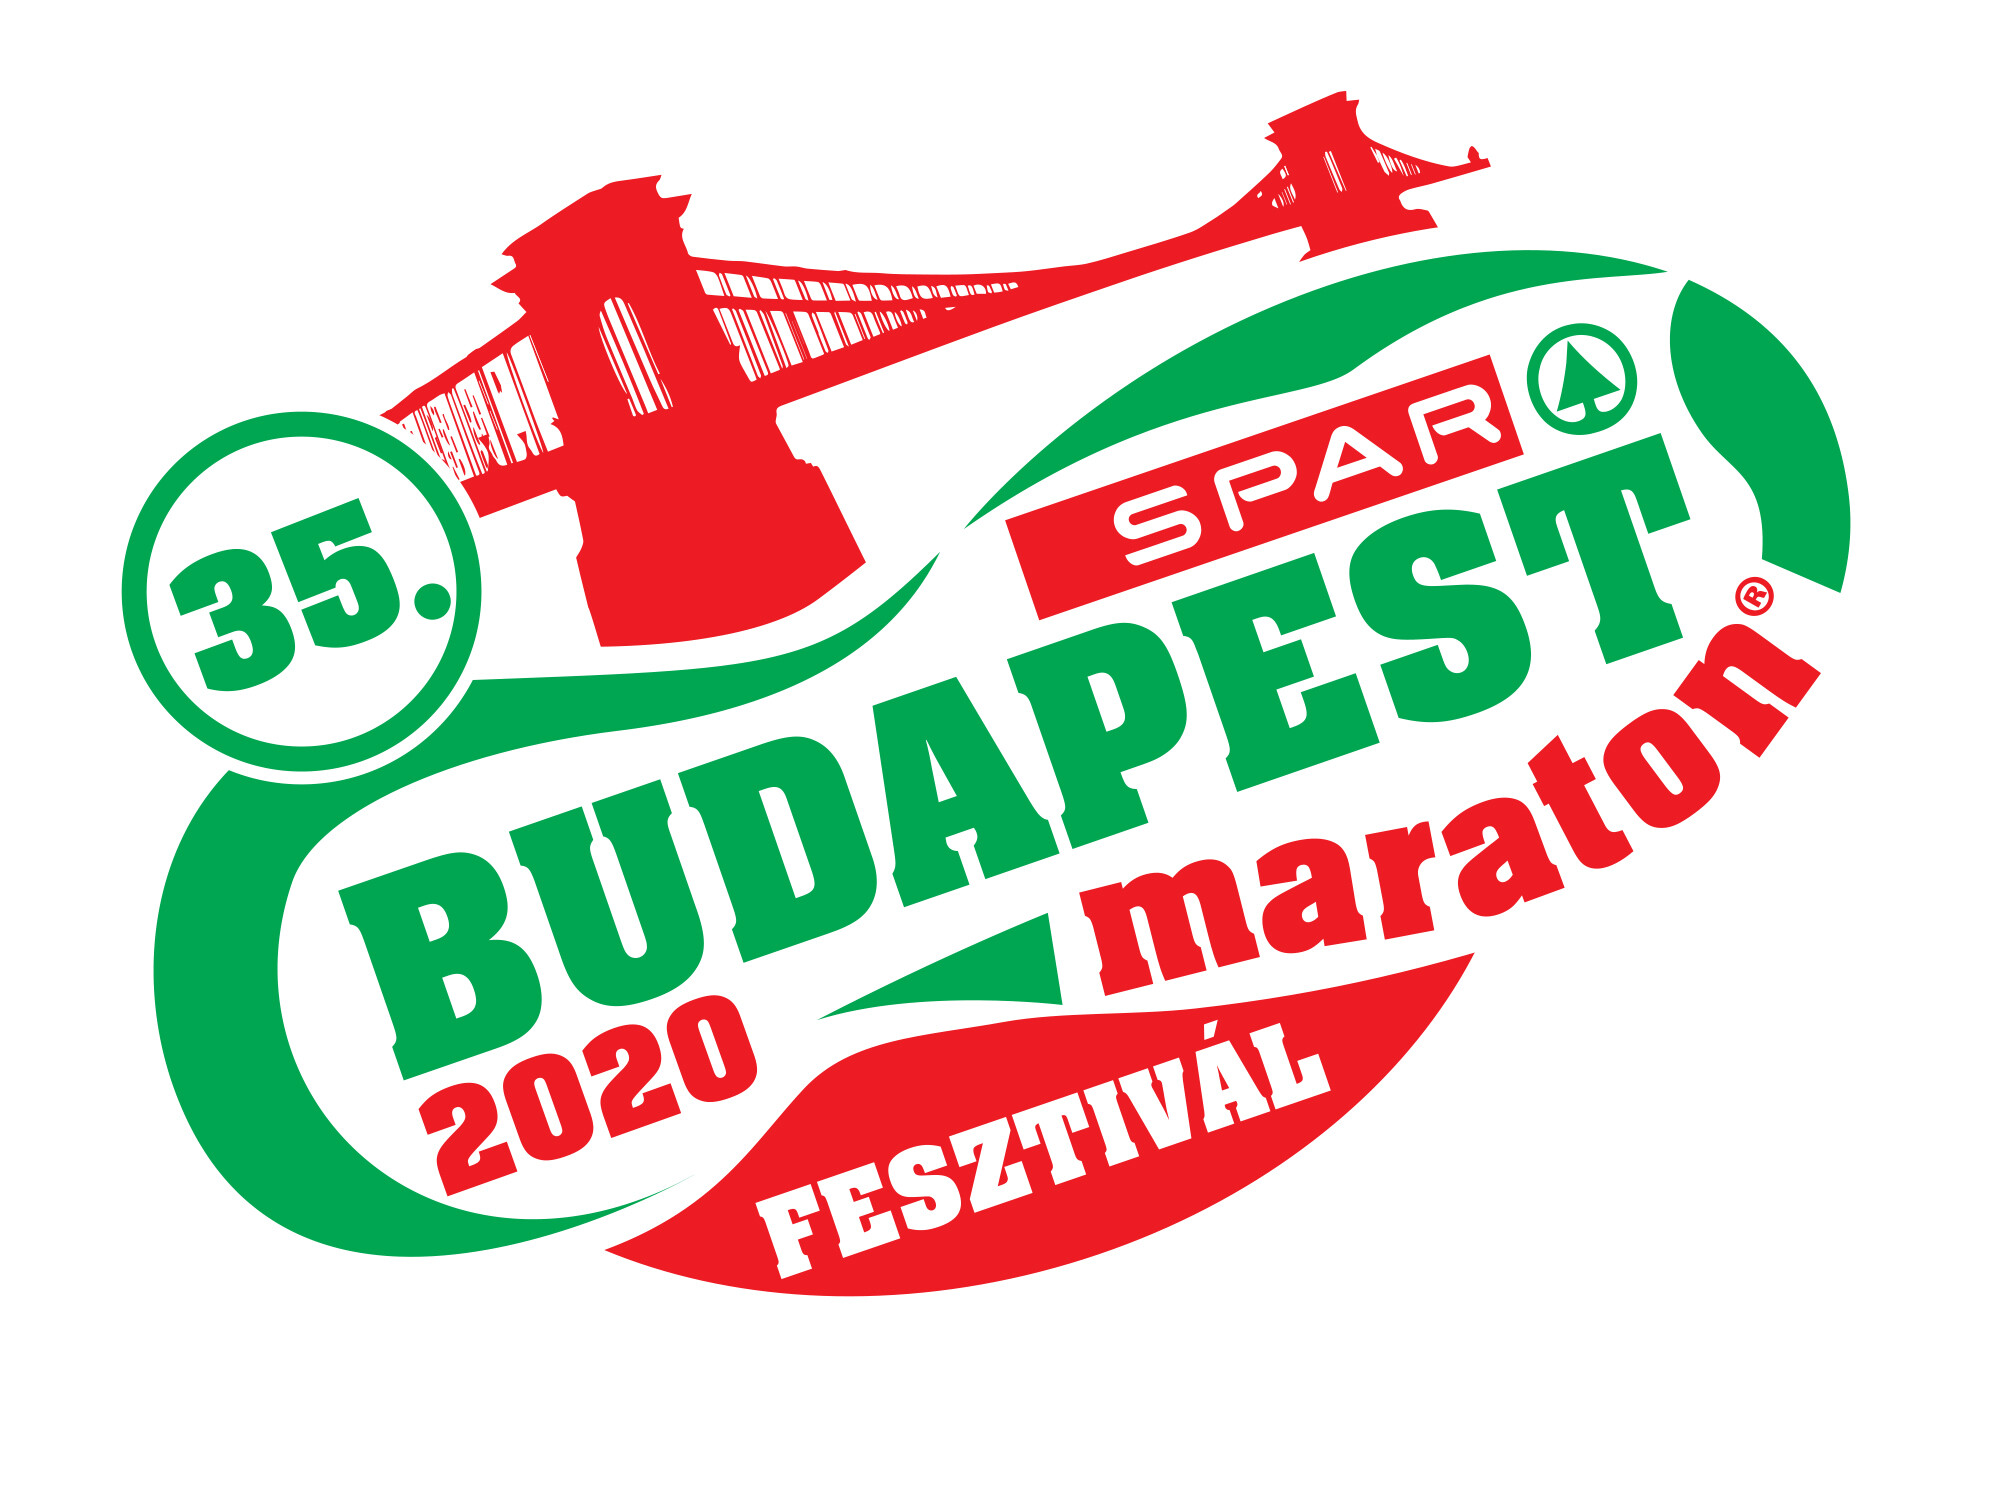 Run with the world: The SPAR Budapest Marathon® is waiting for you too!